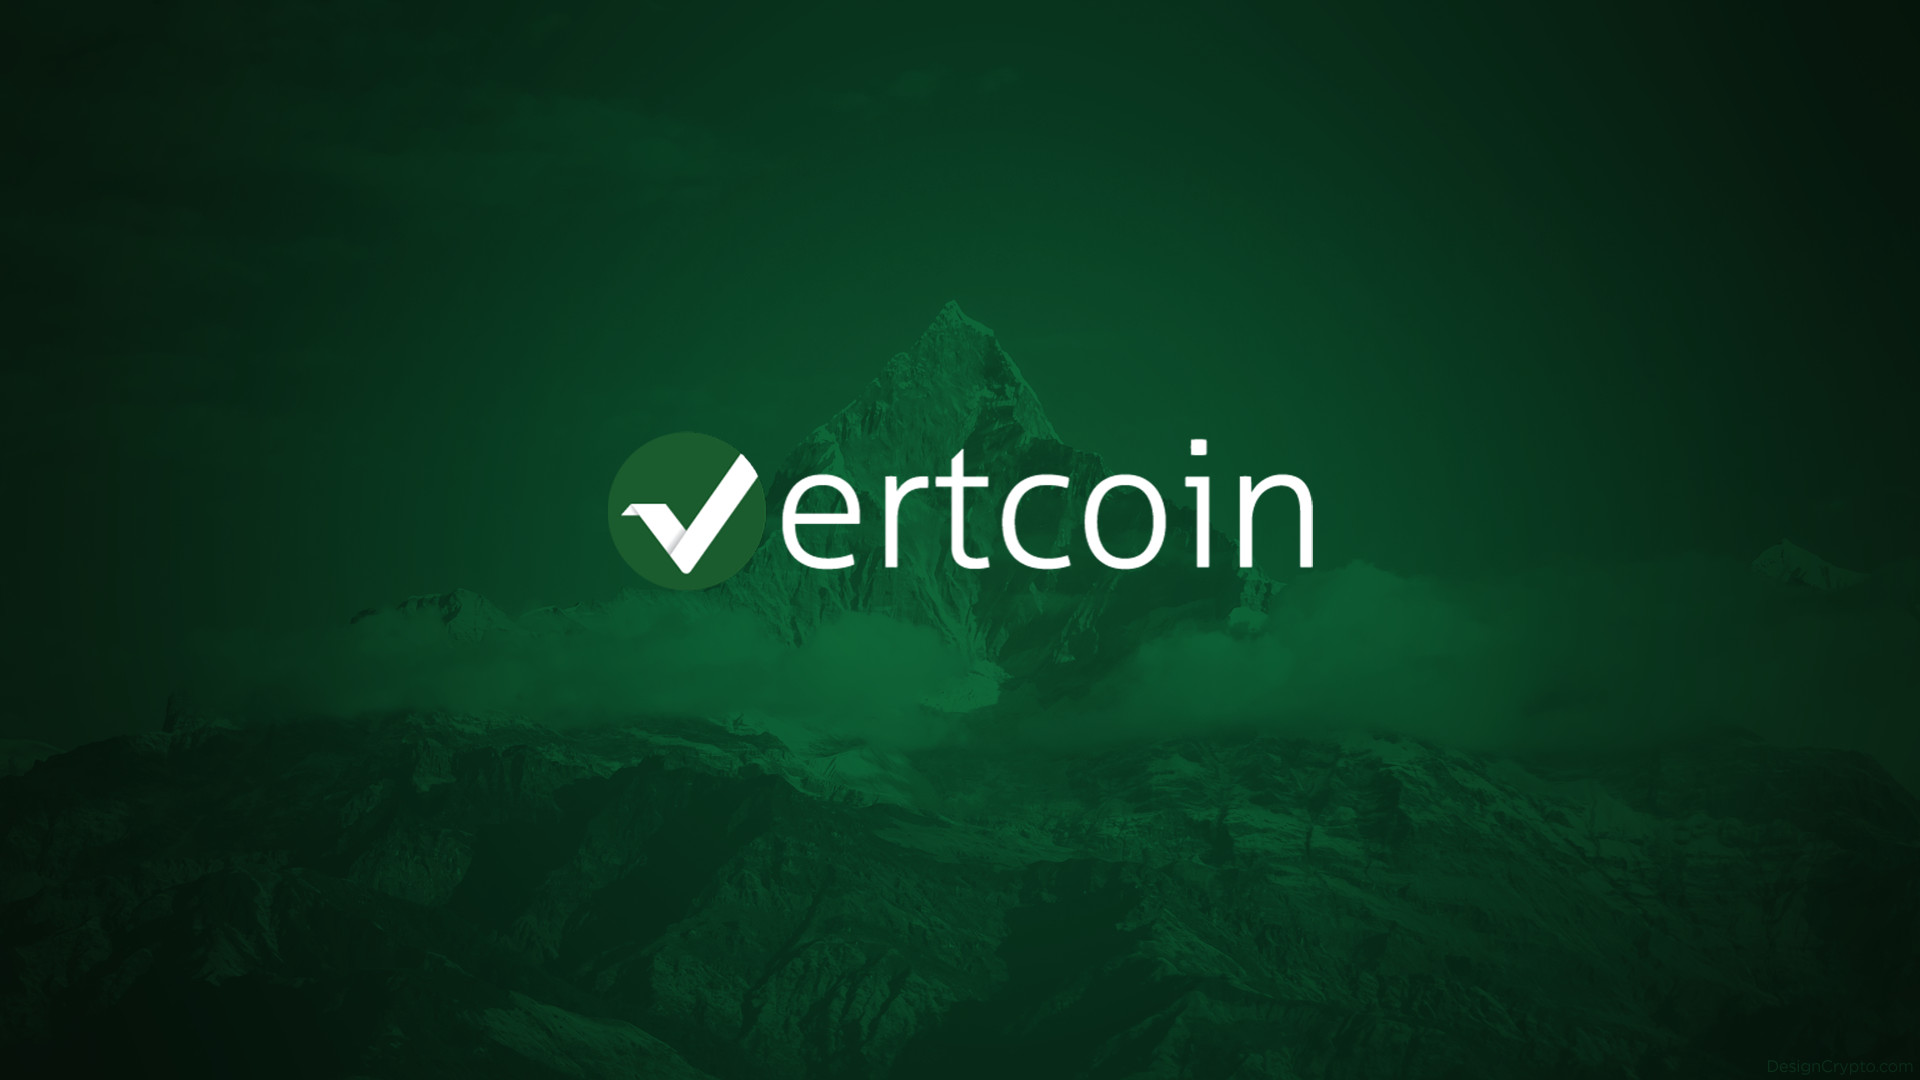 1920x1080 Few Vertcoin Wallpapers put together by DesignCrypto : vertcoin